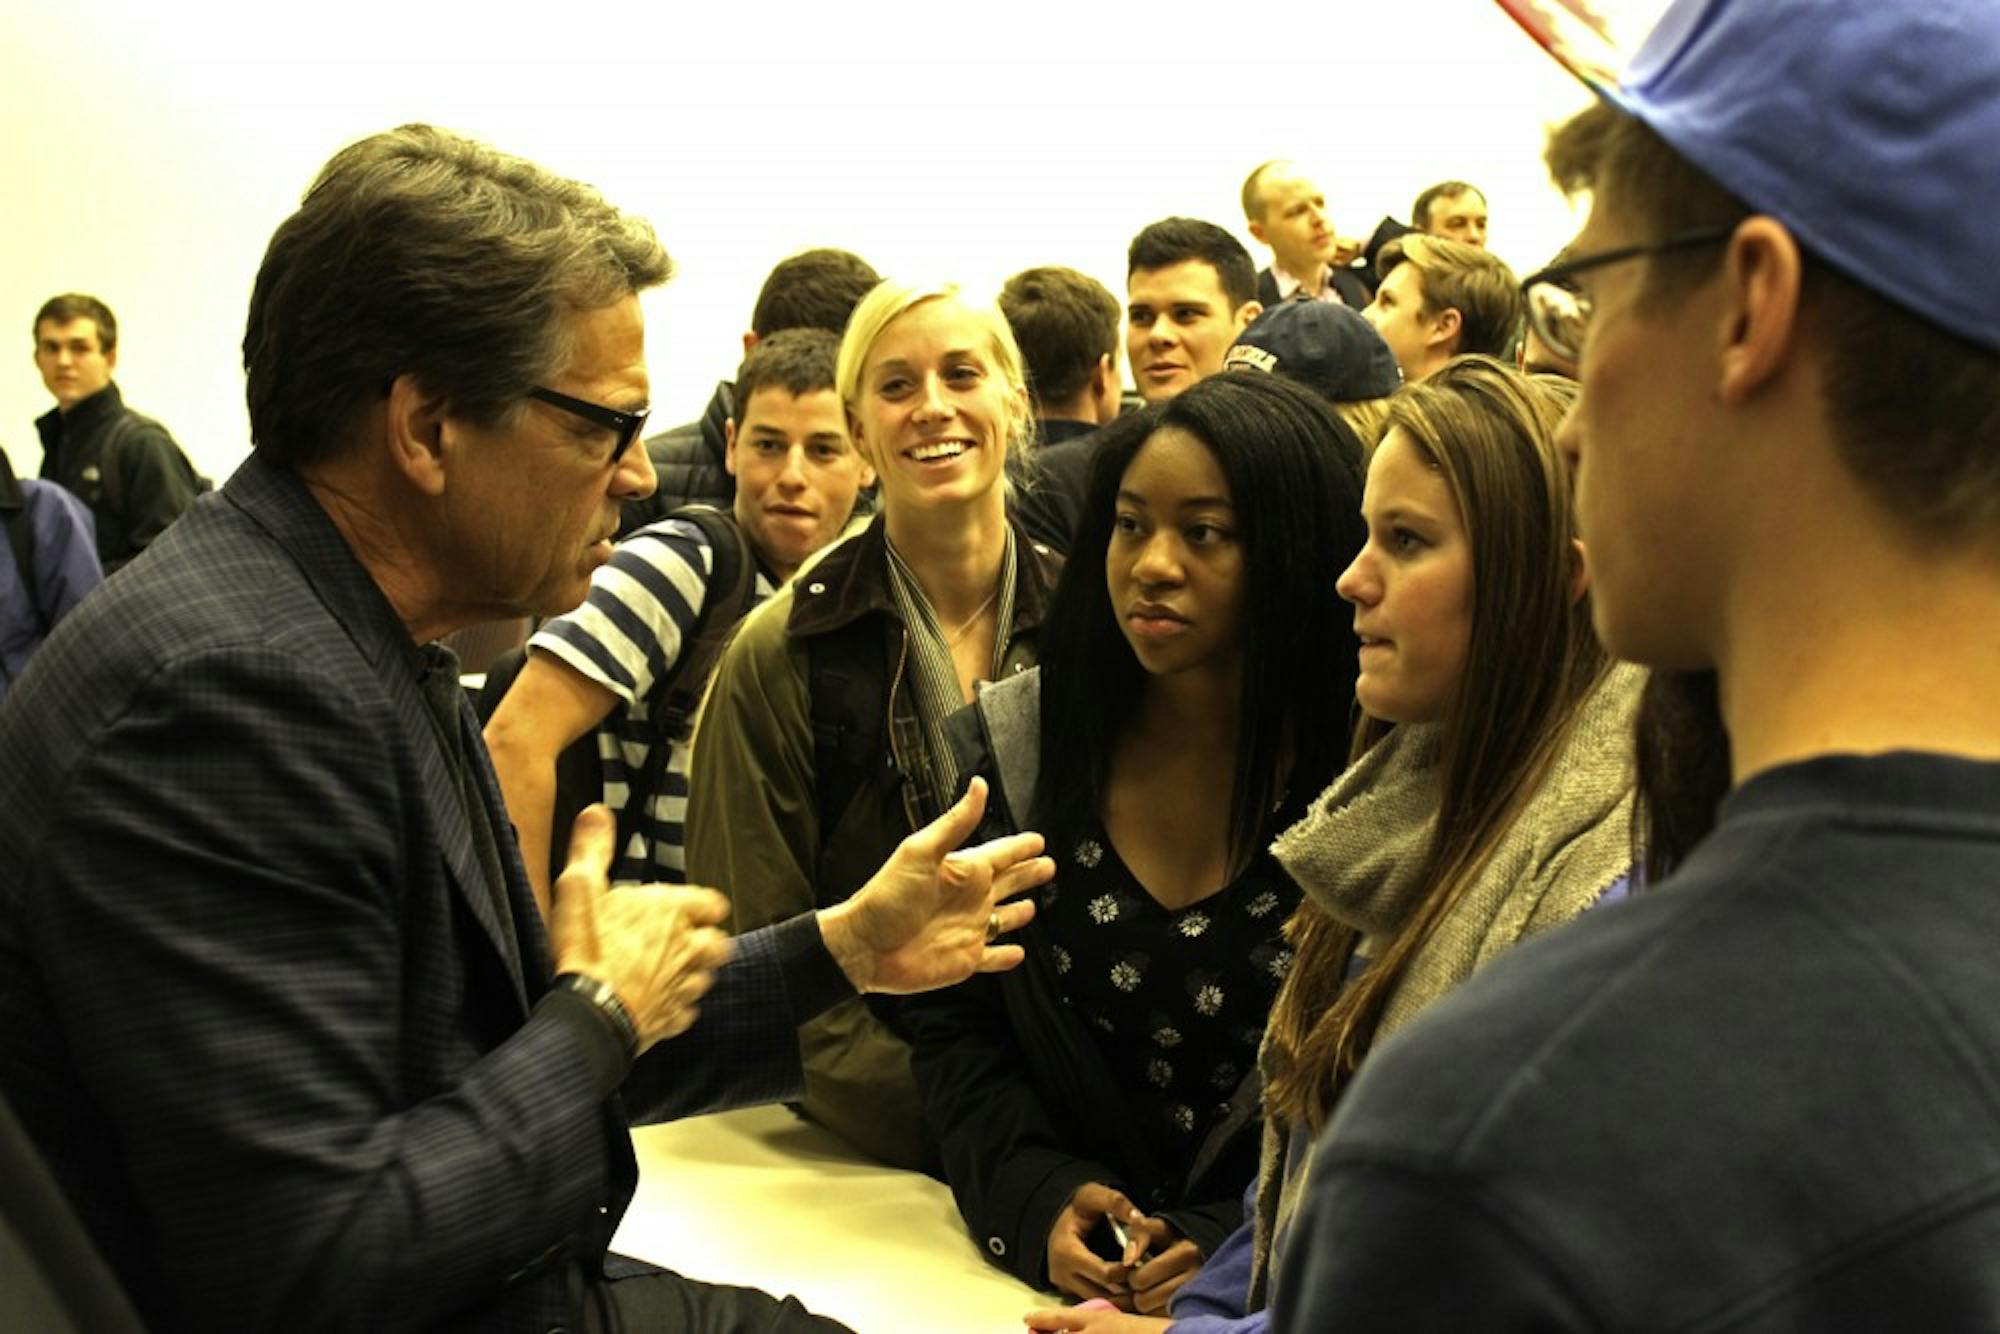 11-10-14-news-rick-perry2-trevy-wing